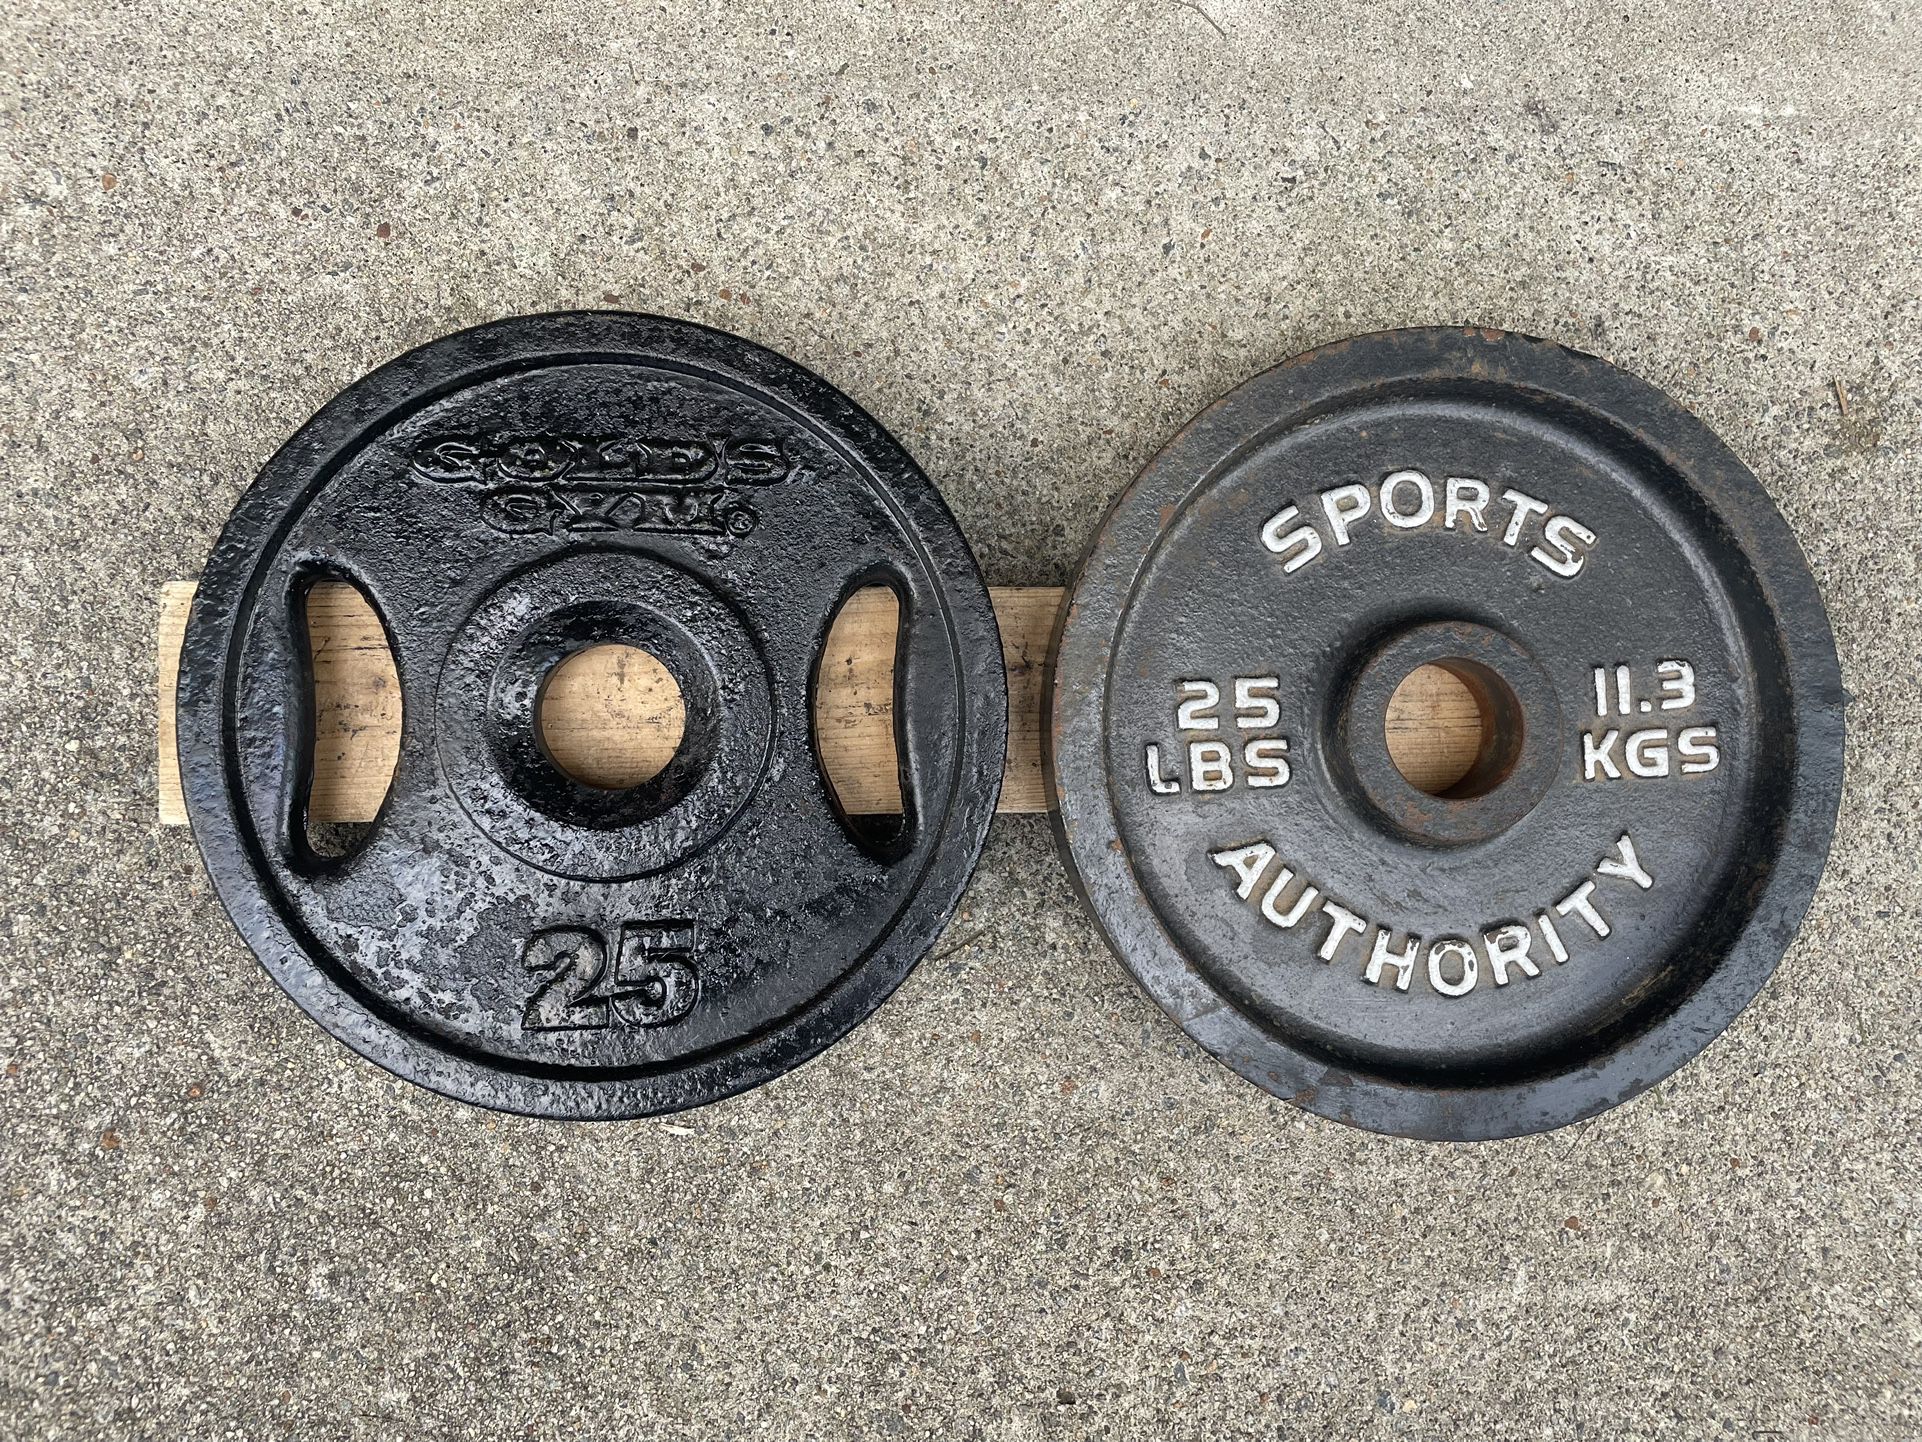 Olympic Weight Plates 50 lbs